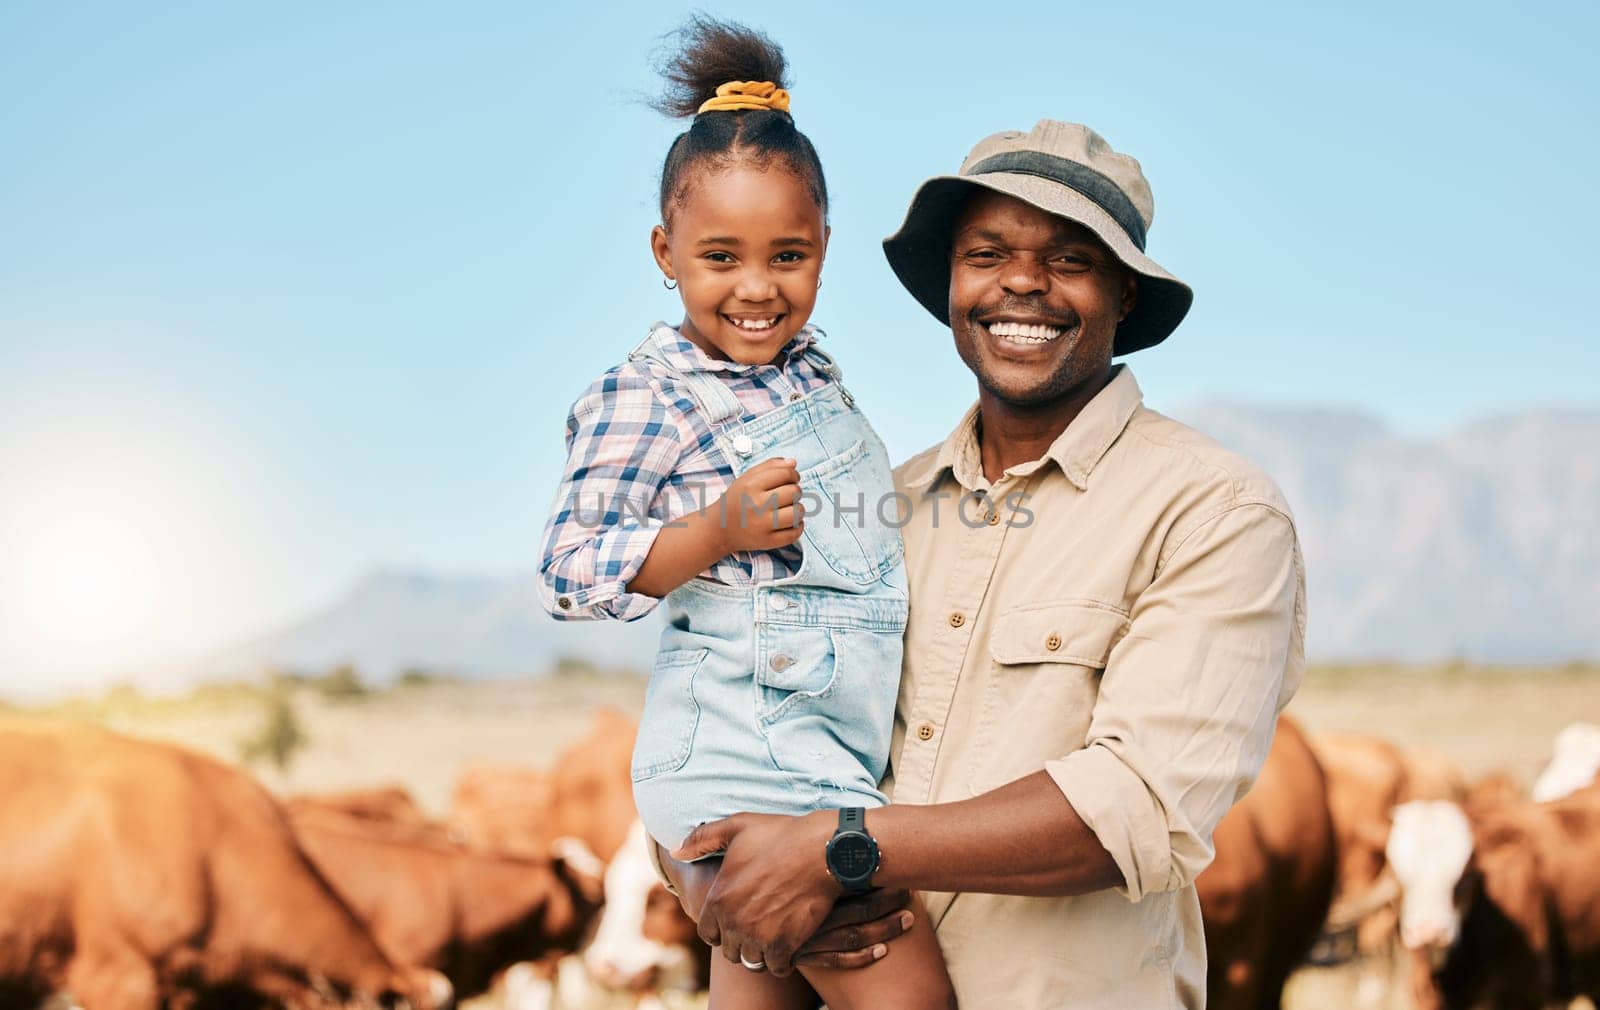 Animals, father and daughter or family on farm outdoor for cattle, holiday and travel. Happy black man and child smile on a field for farmer adventure or trip in countryside with cows in Africa.